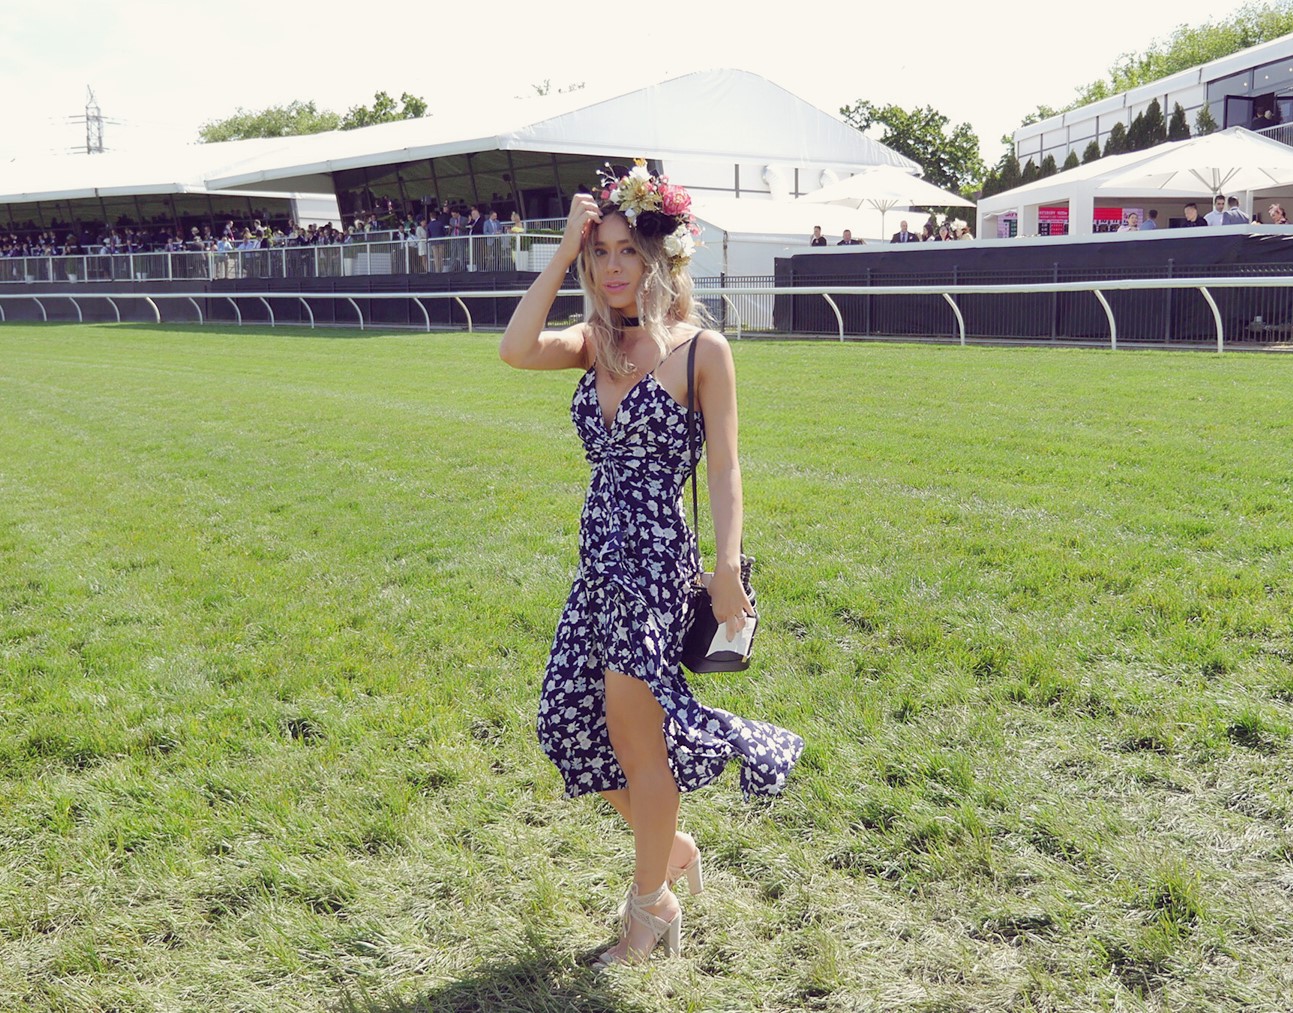 KENNEDY OAKS DAY DURING THE MELBOURNE CUP - BiiBiiBeauty